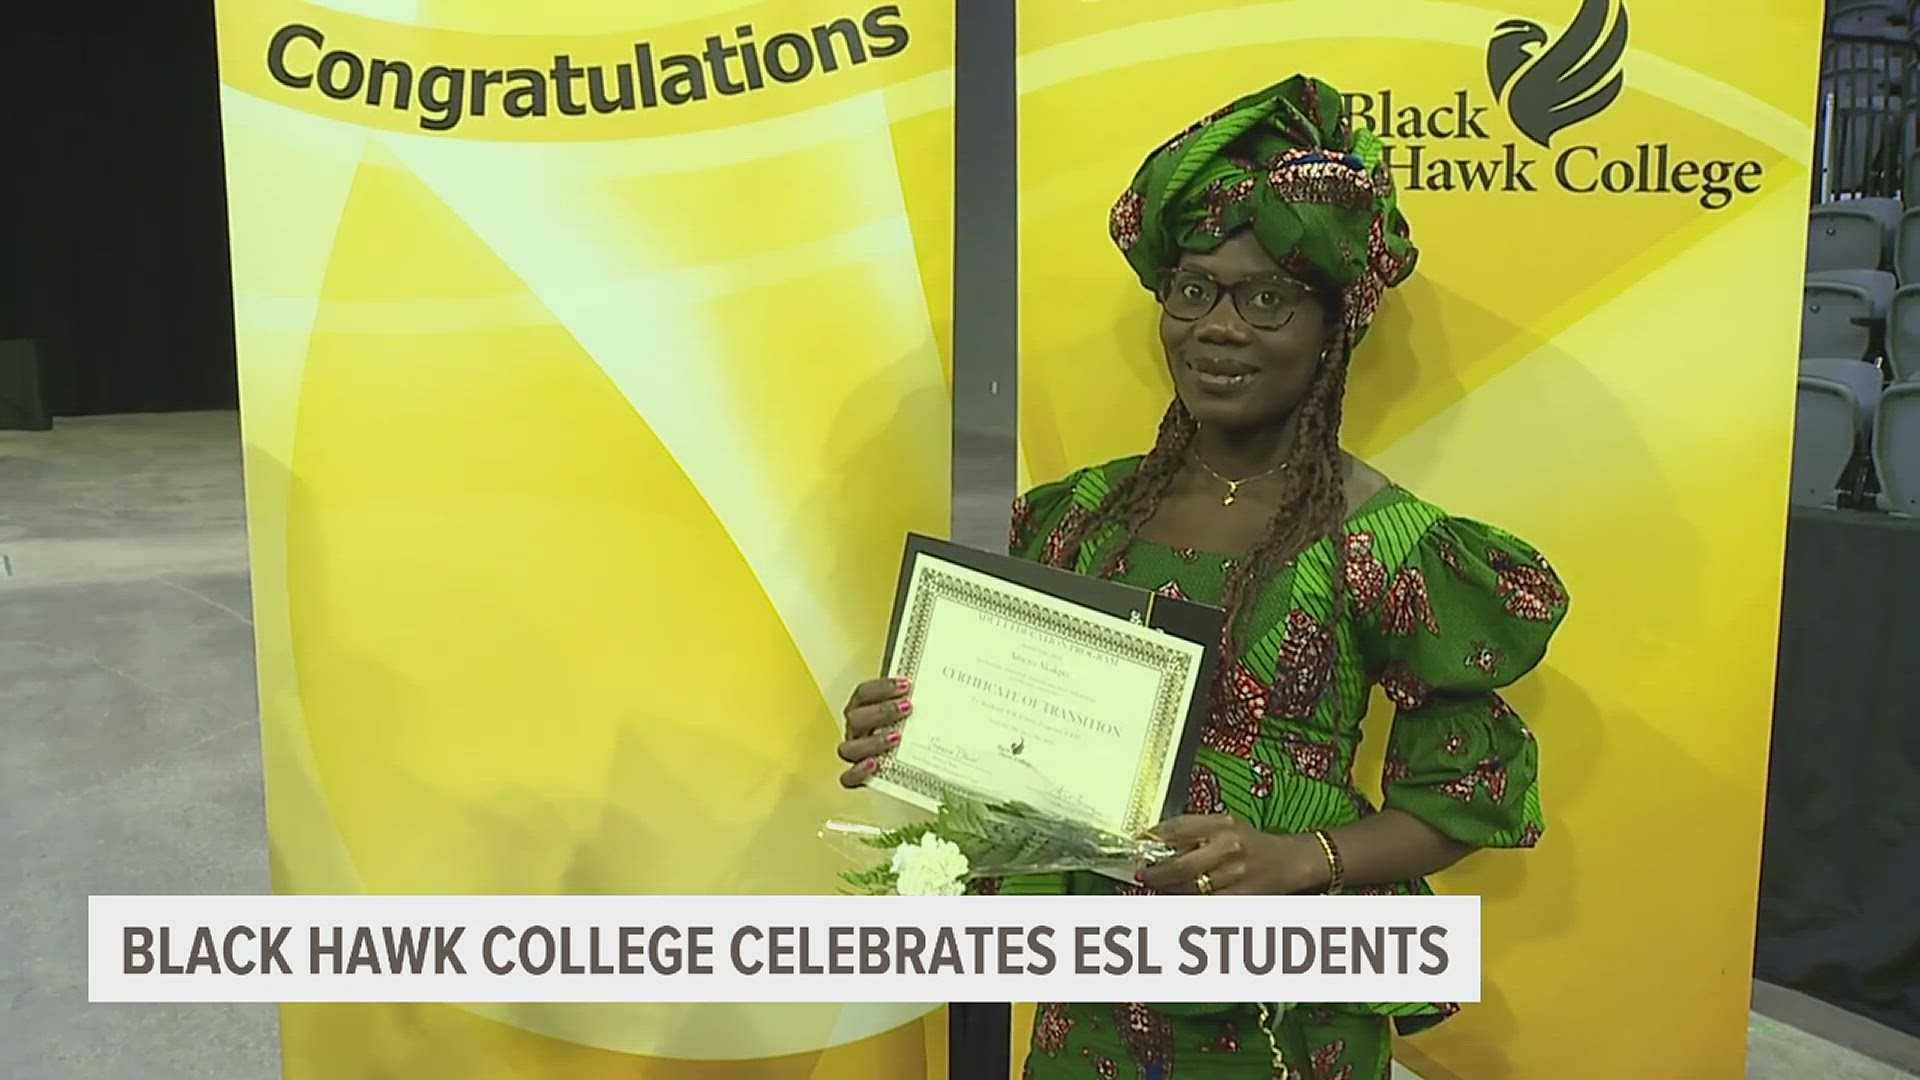 40 students from 10 different countries graduated with from the school's ESL program